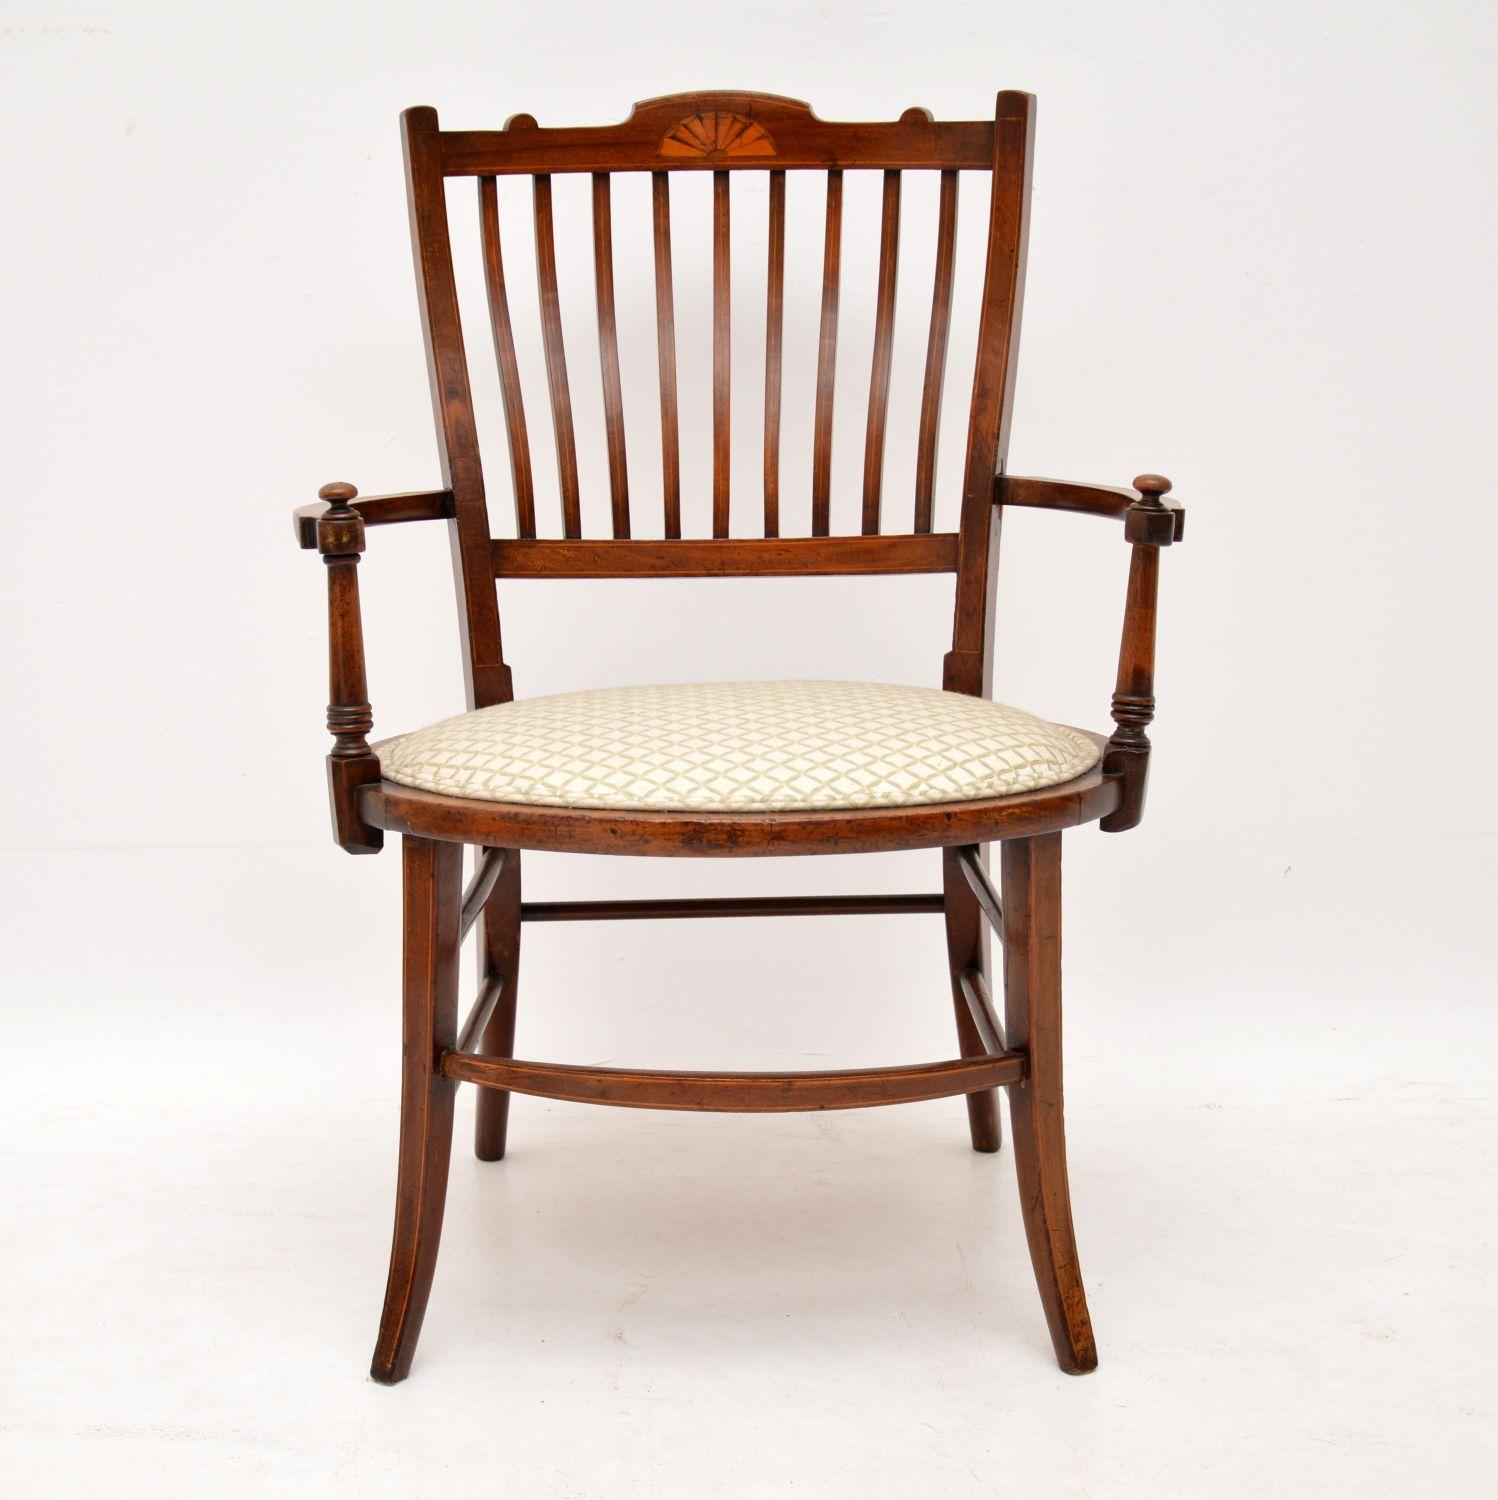 This antique Edwardian inlaid mahogany armchair is in lovely original condition. It’s been gently polished and we have left the seat as is, because it’s in good condition too, but not new. The frame is of strong construction, with many cross